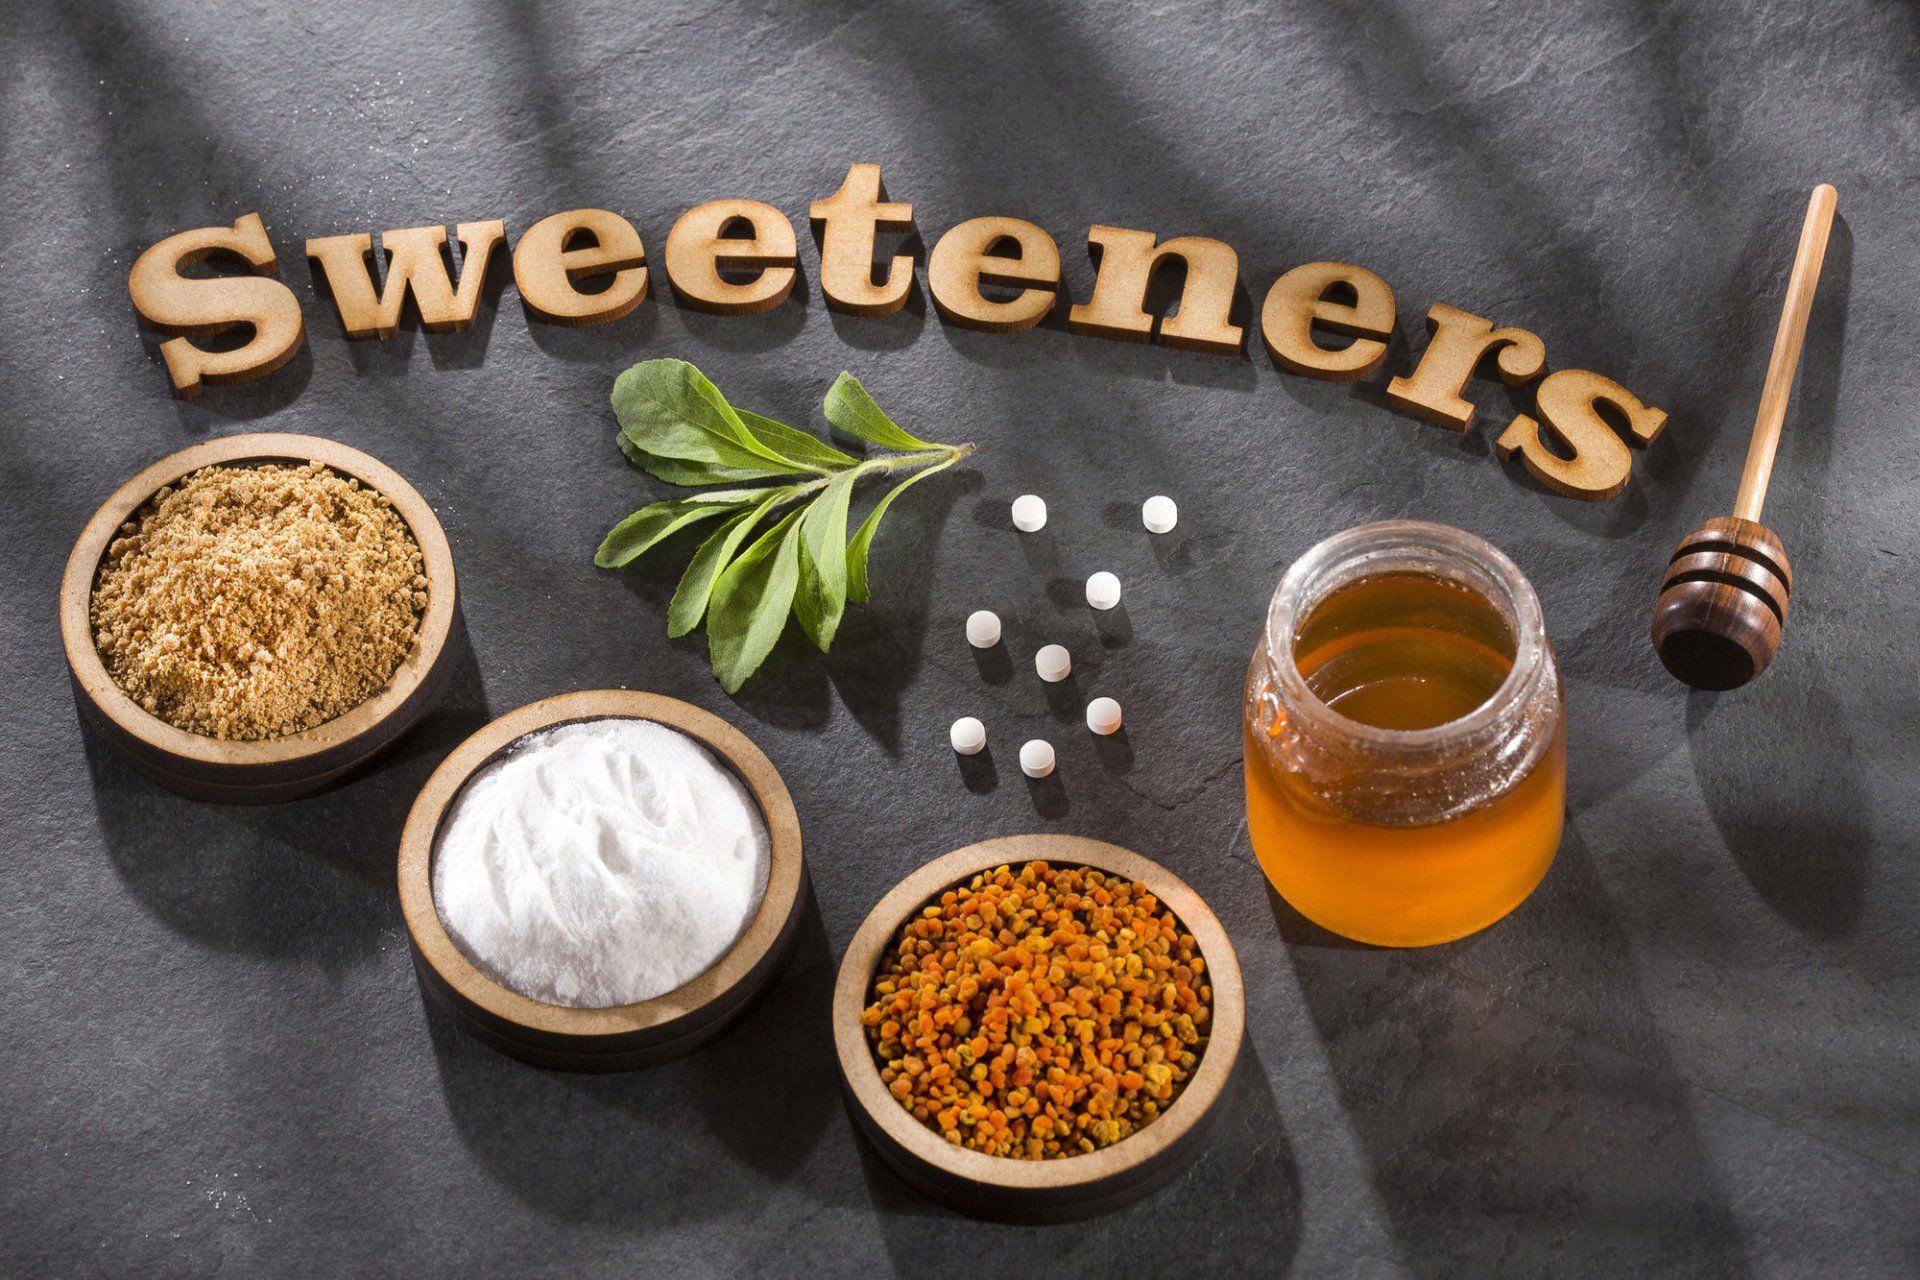 A variety of sweeteners including stevia, honey and sugar cubes